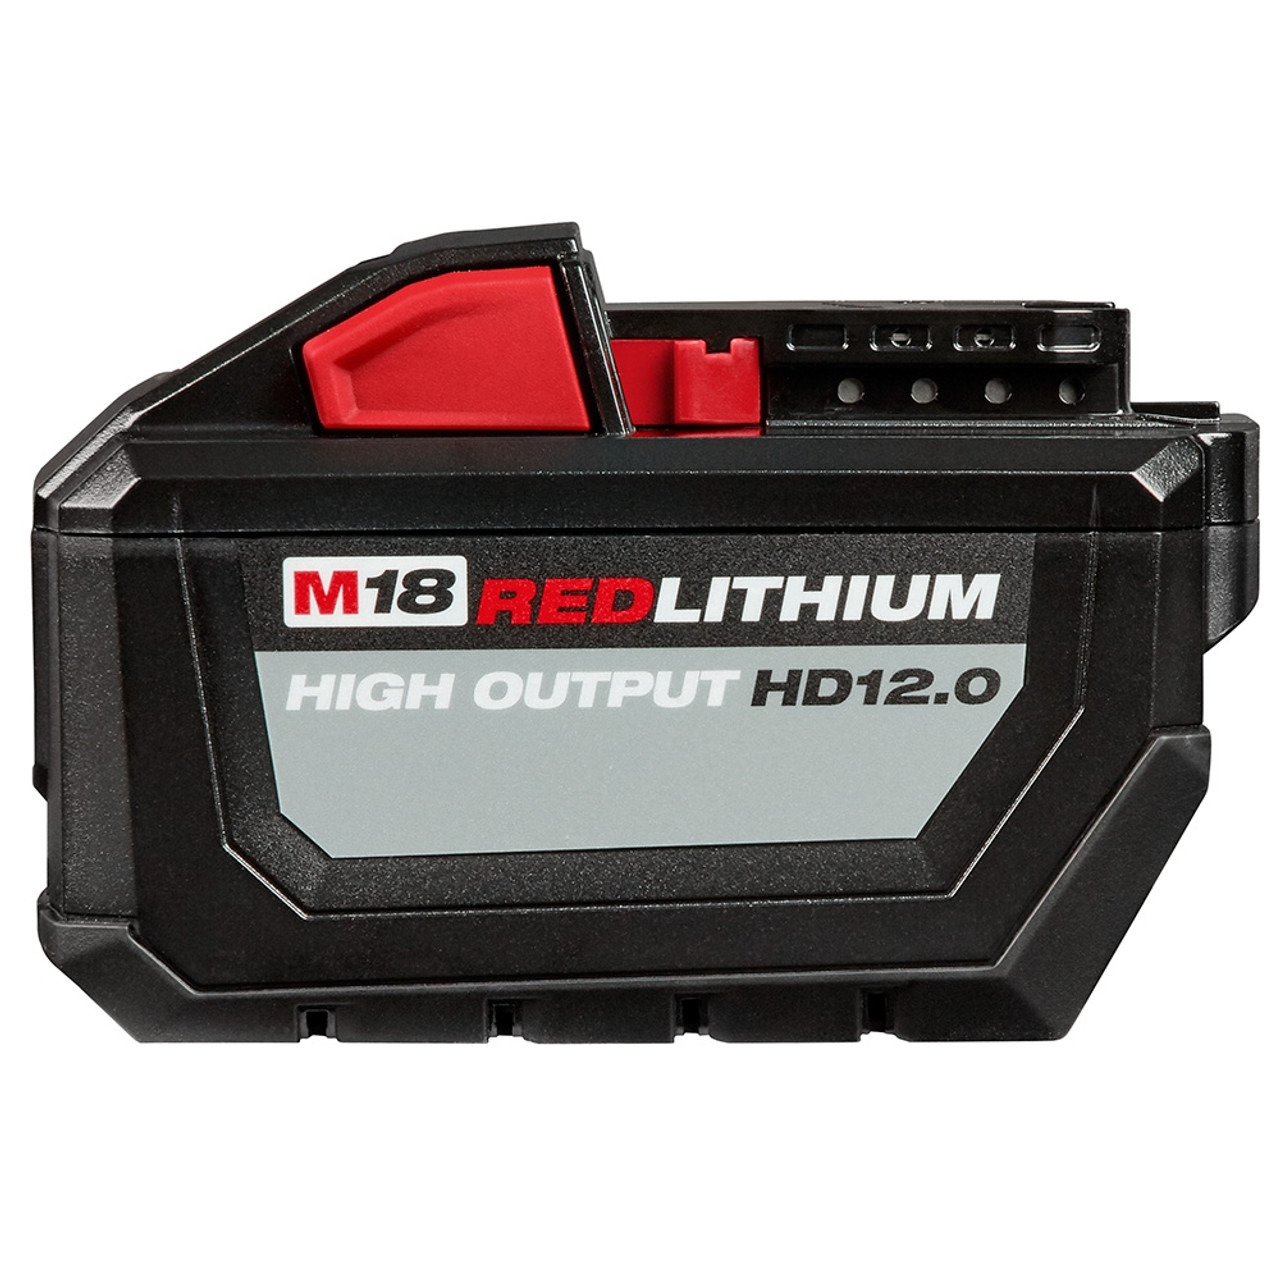 Milwaukee 48-11-1812 M18 REDLITHIUM HIGH OUTPUT HD 12.0 Battery Pack